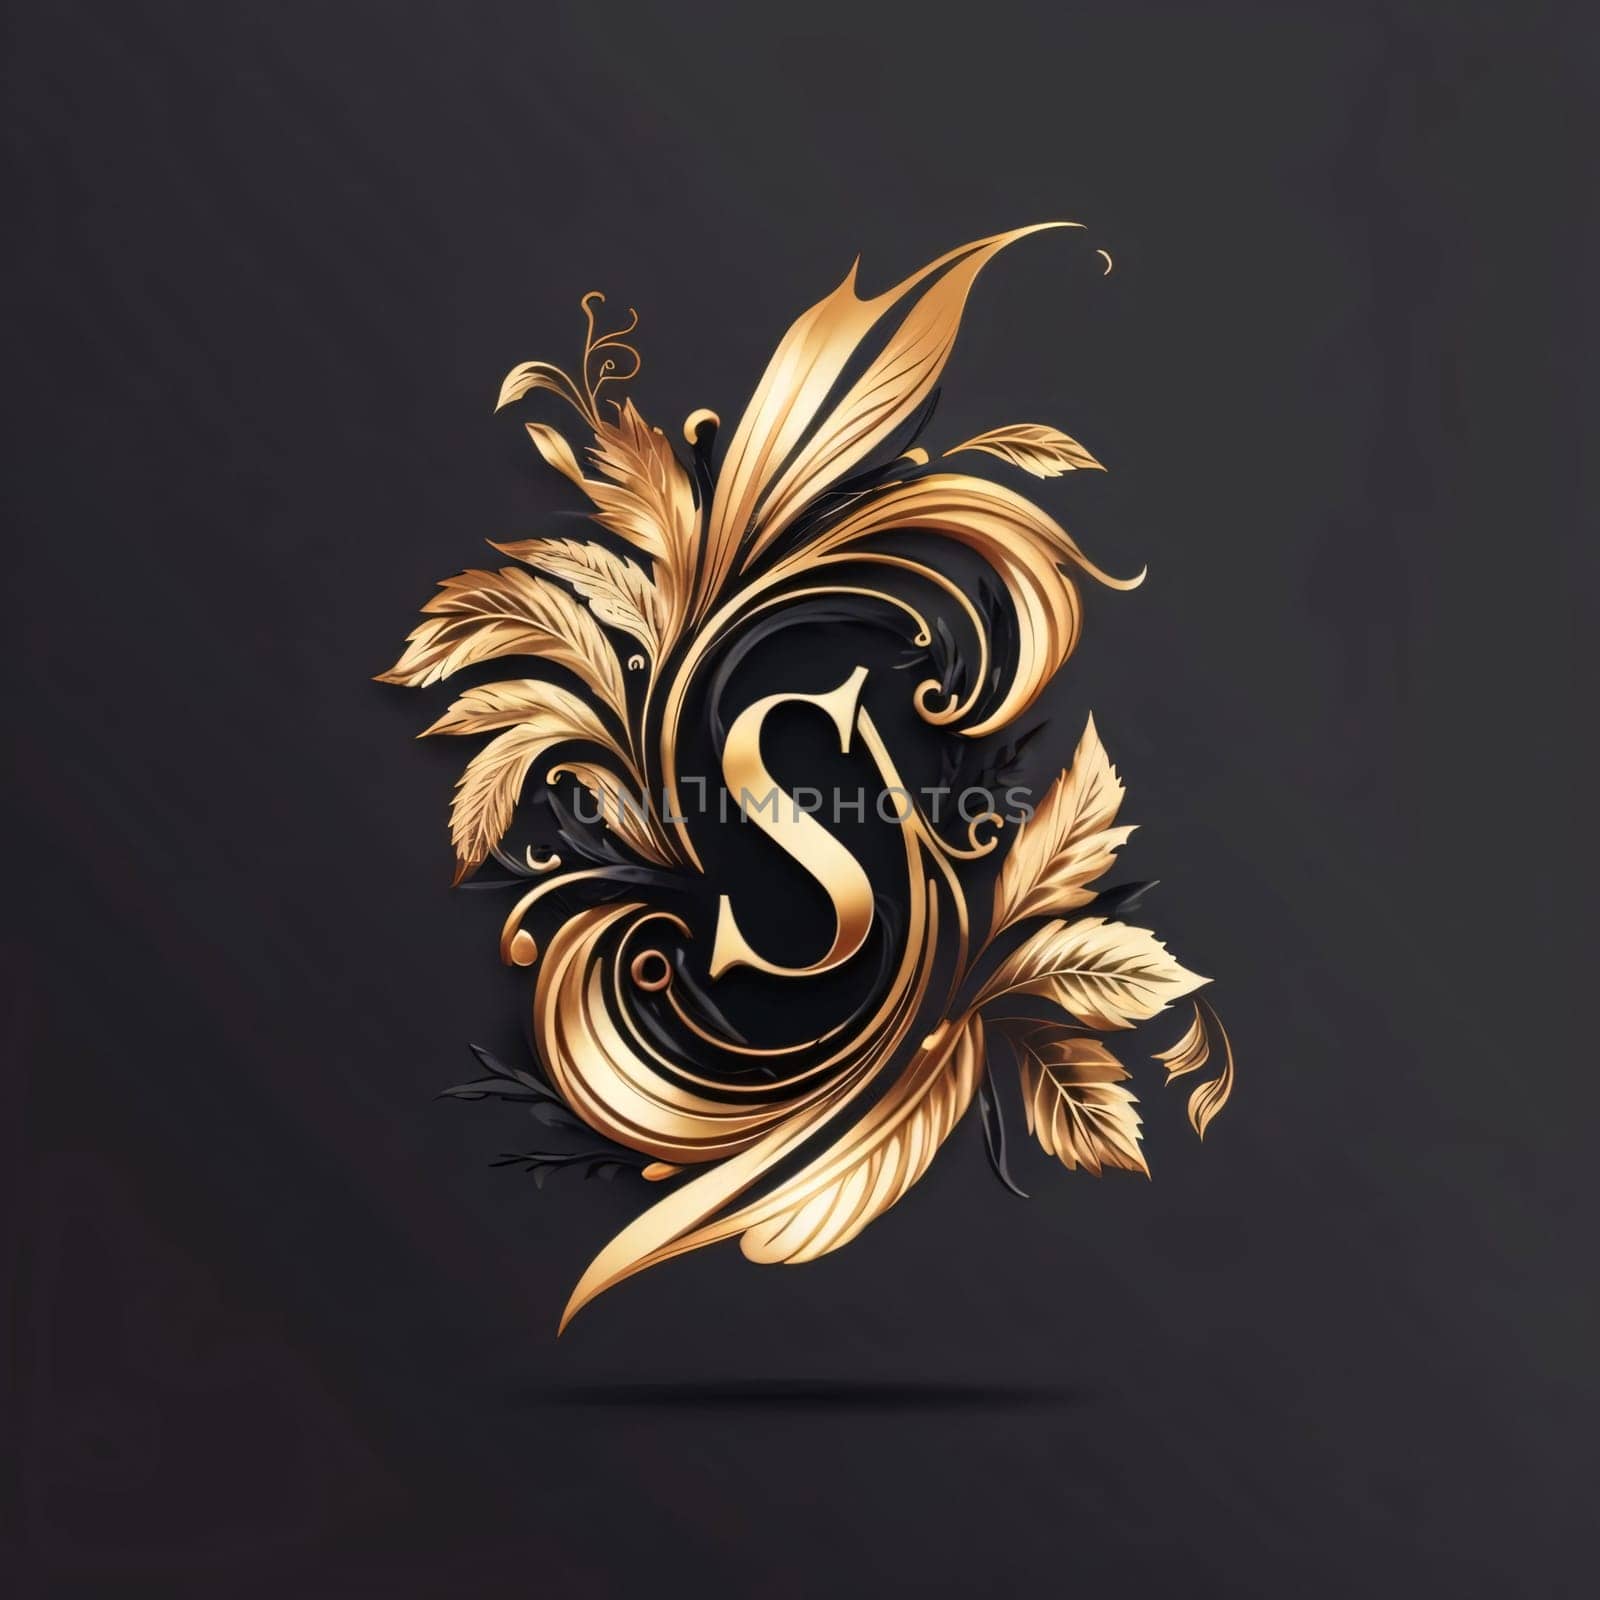 Graphic alphabet letters: Luxury golden letter S with floral ornament. Vector illustration.